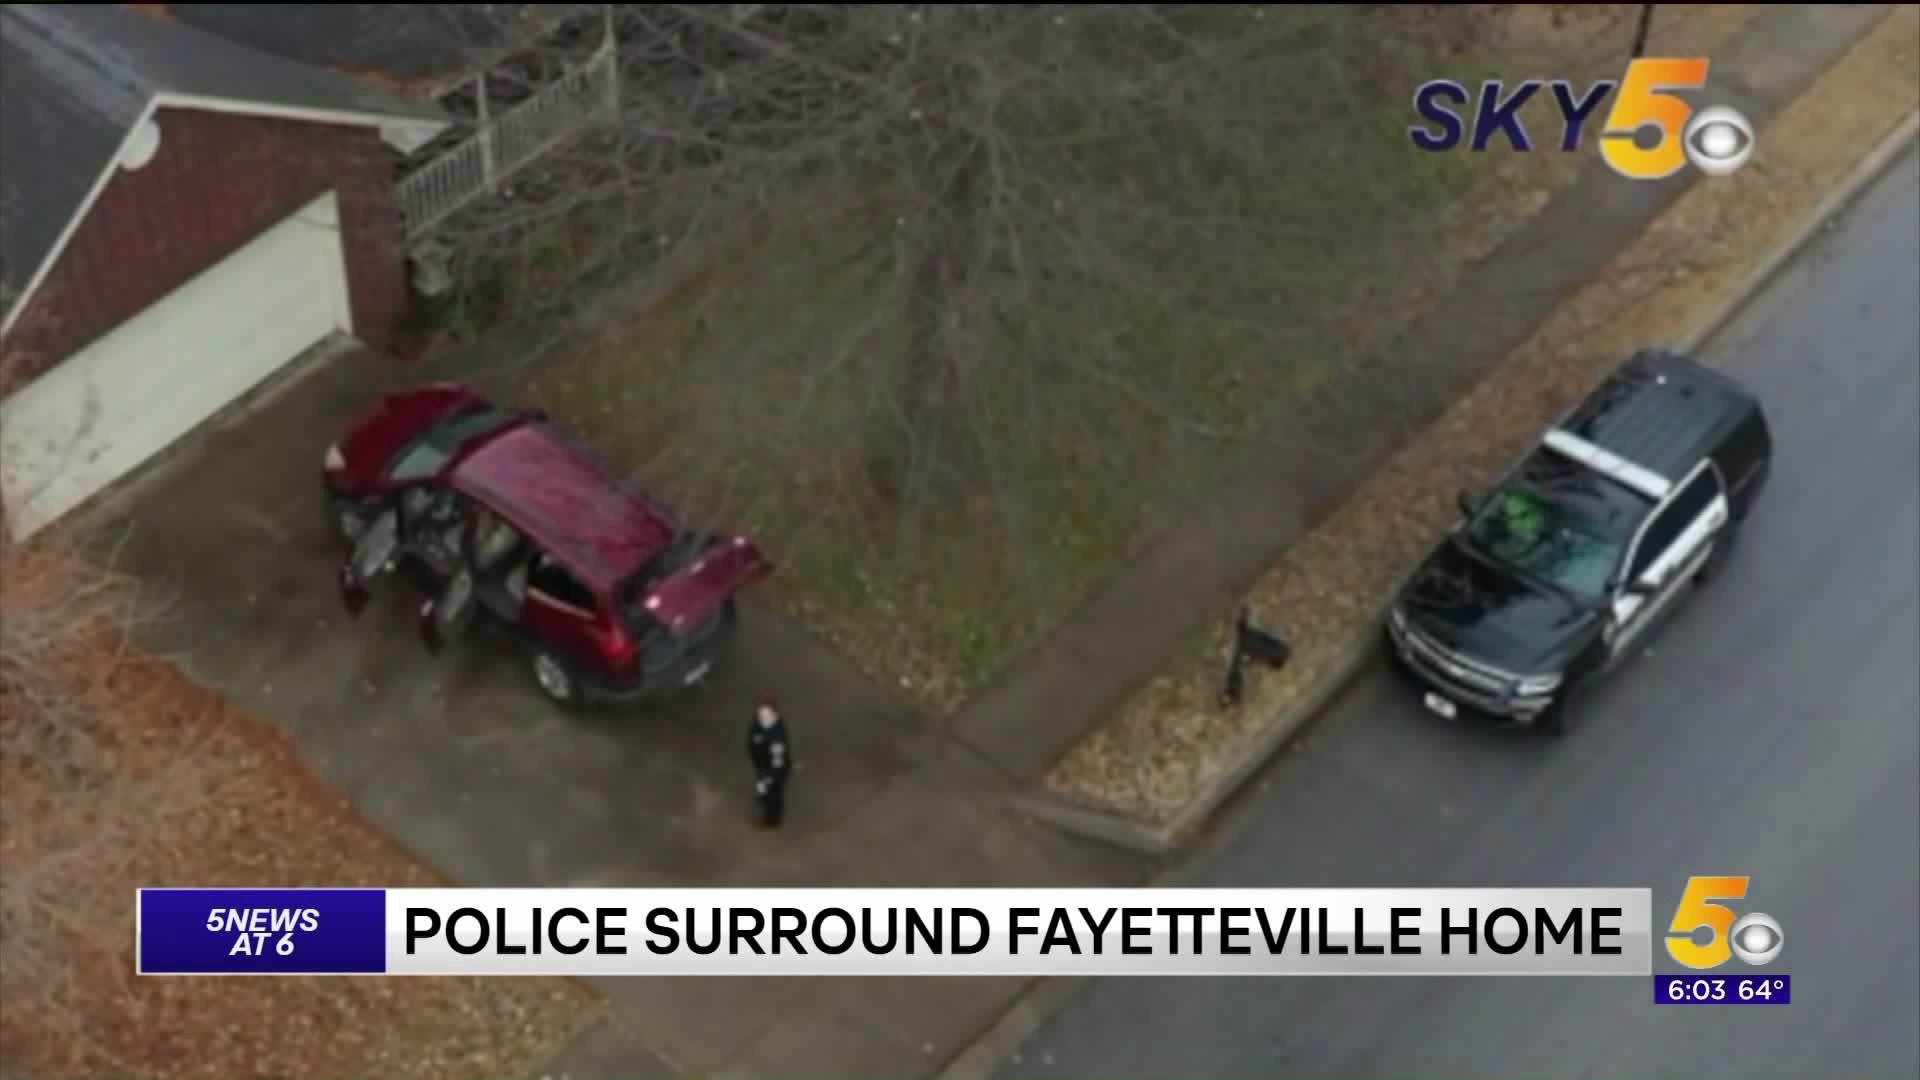 Police Surround Fayetteville Home